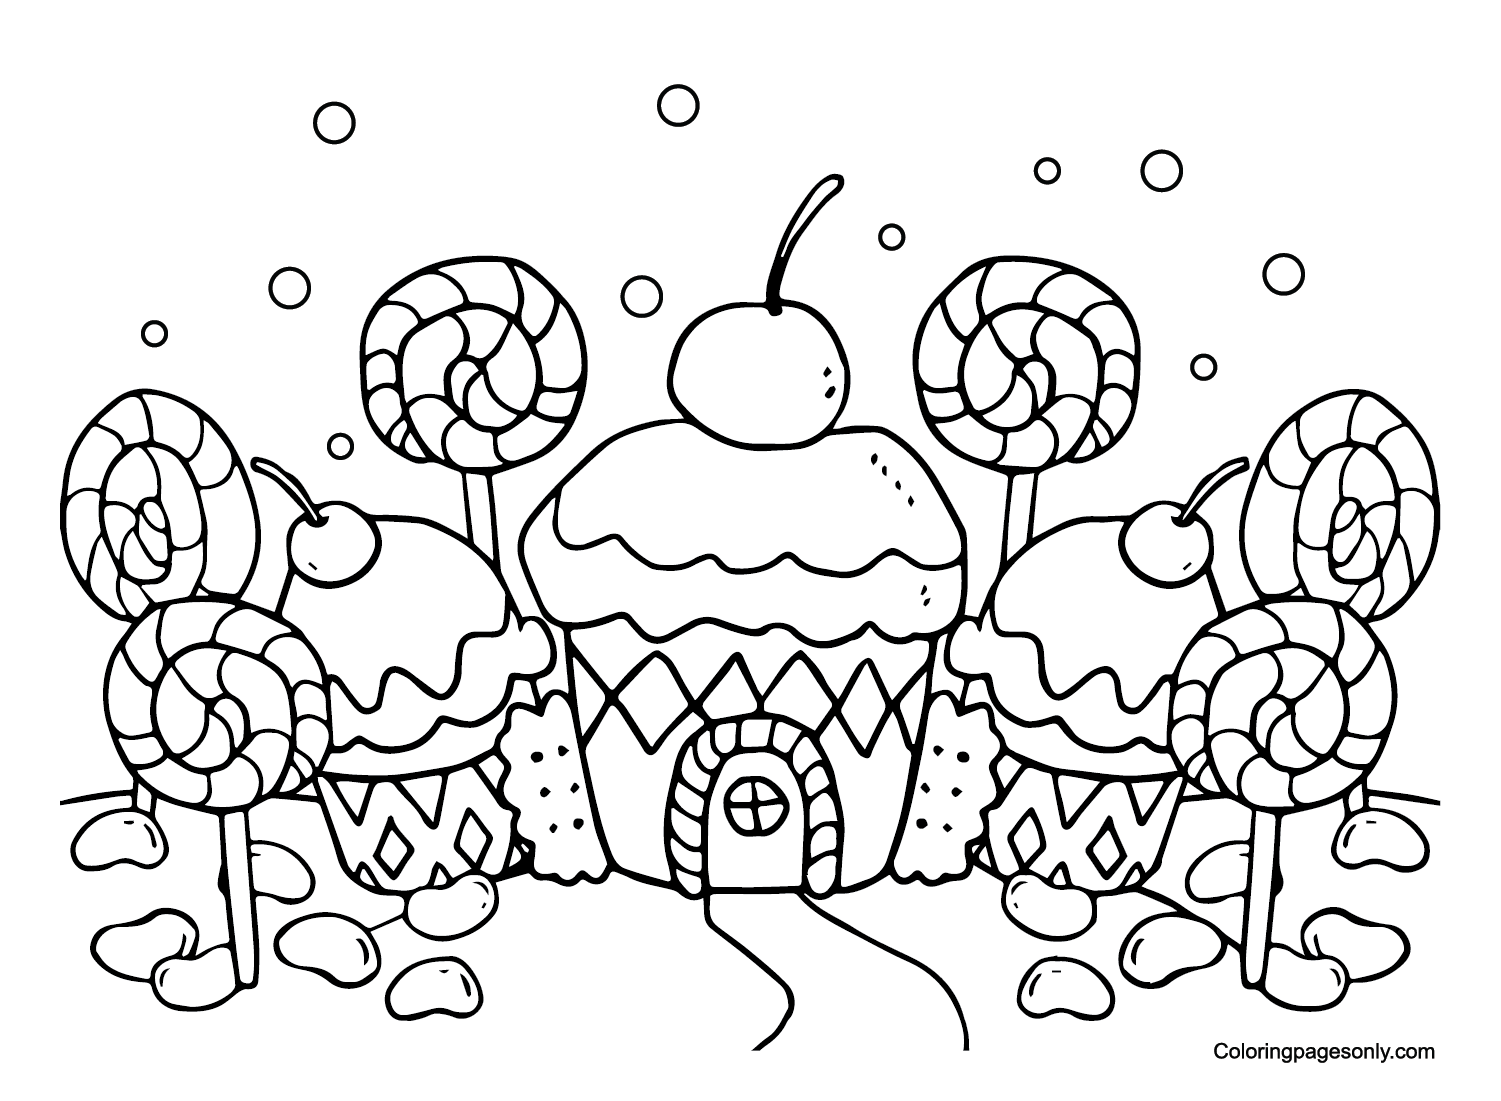 candyland-coloring-pages-coloring-pages-for-kids-and-adults